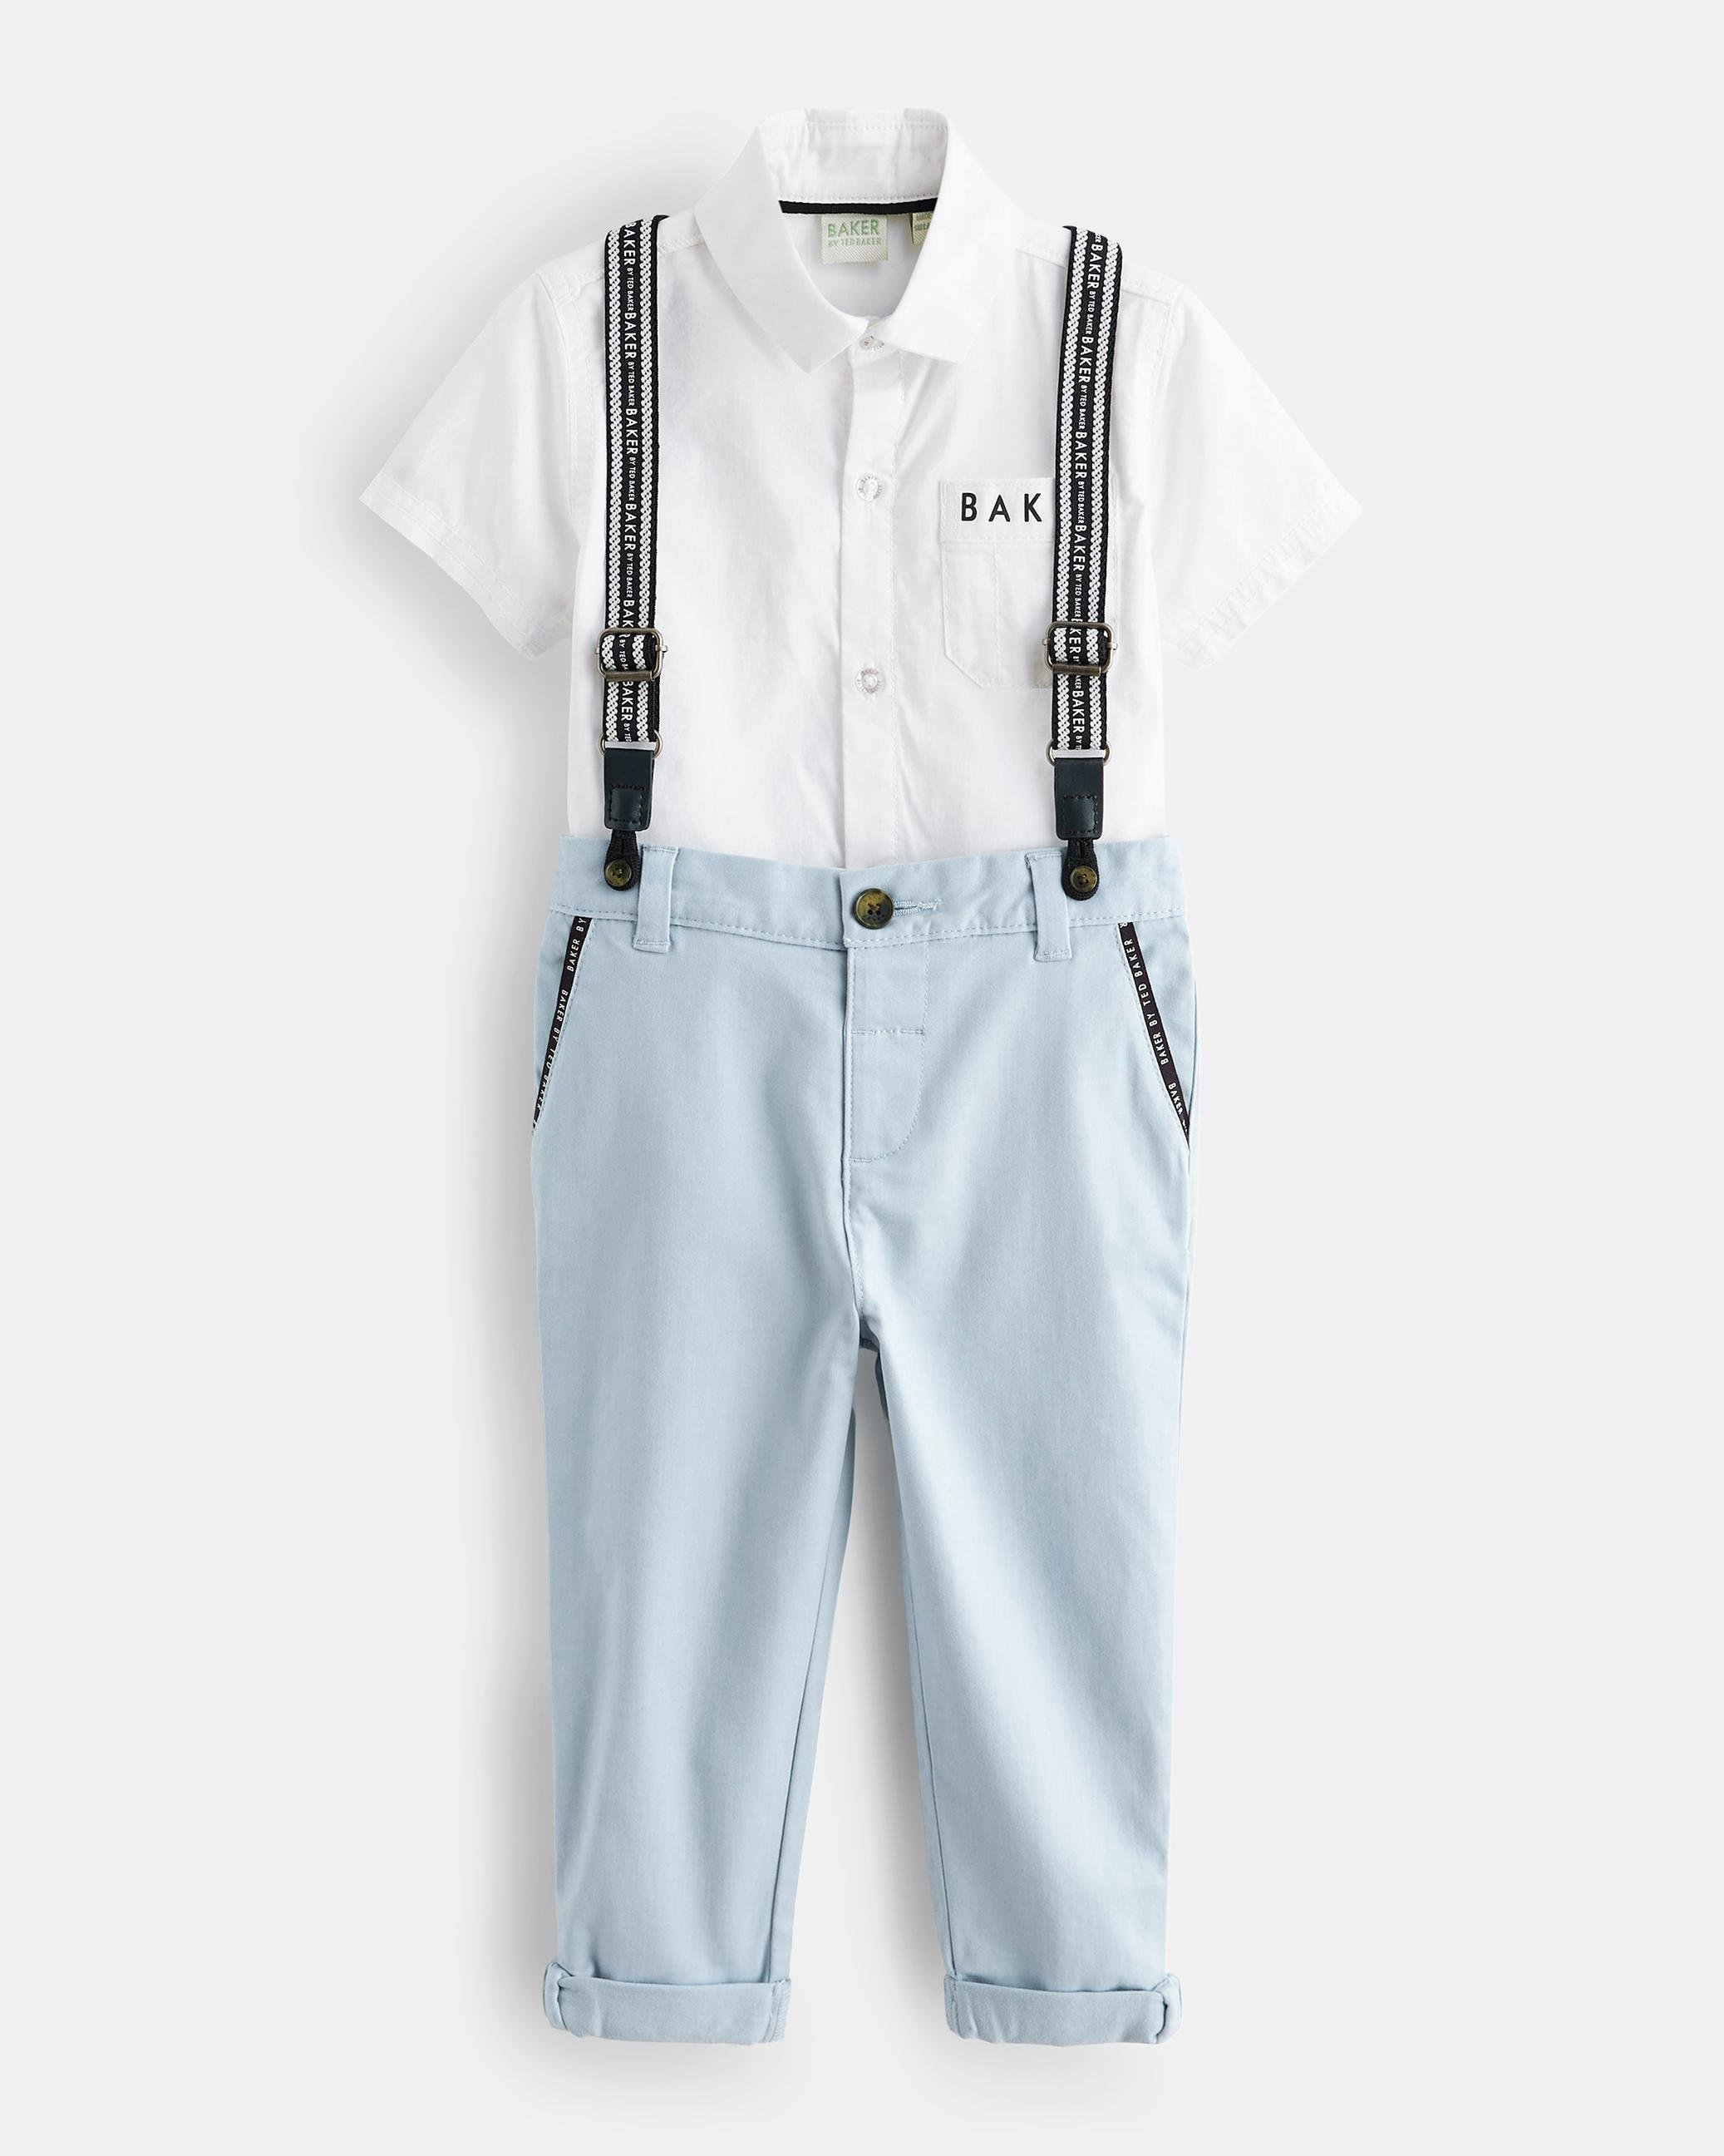 Branded Shirt, Trousers And Braces Set - HARALAM - Blue by TED BAKER